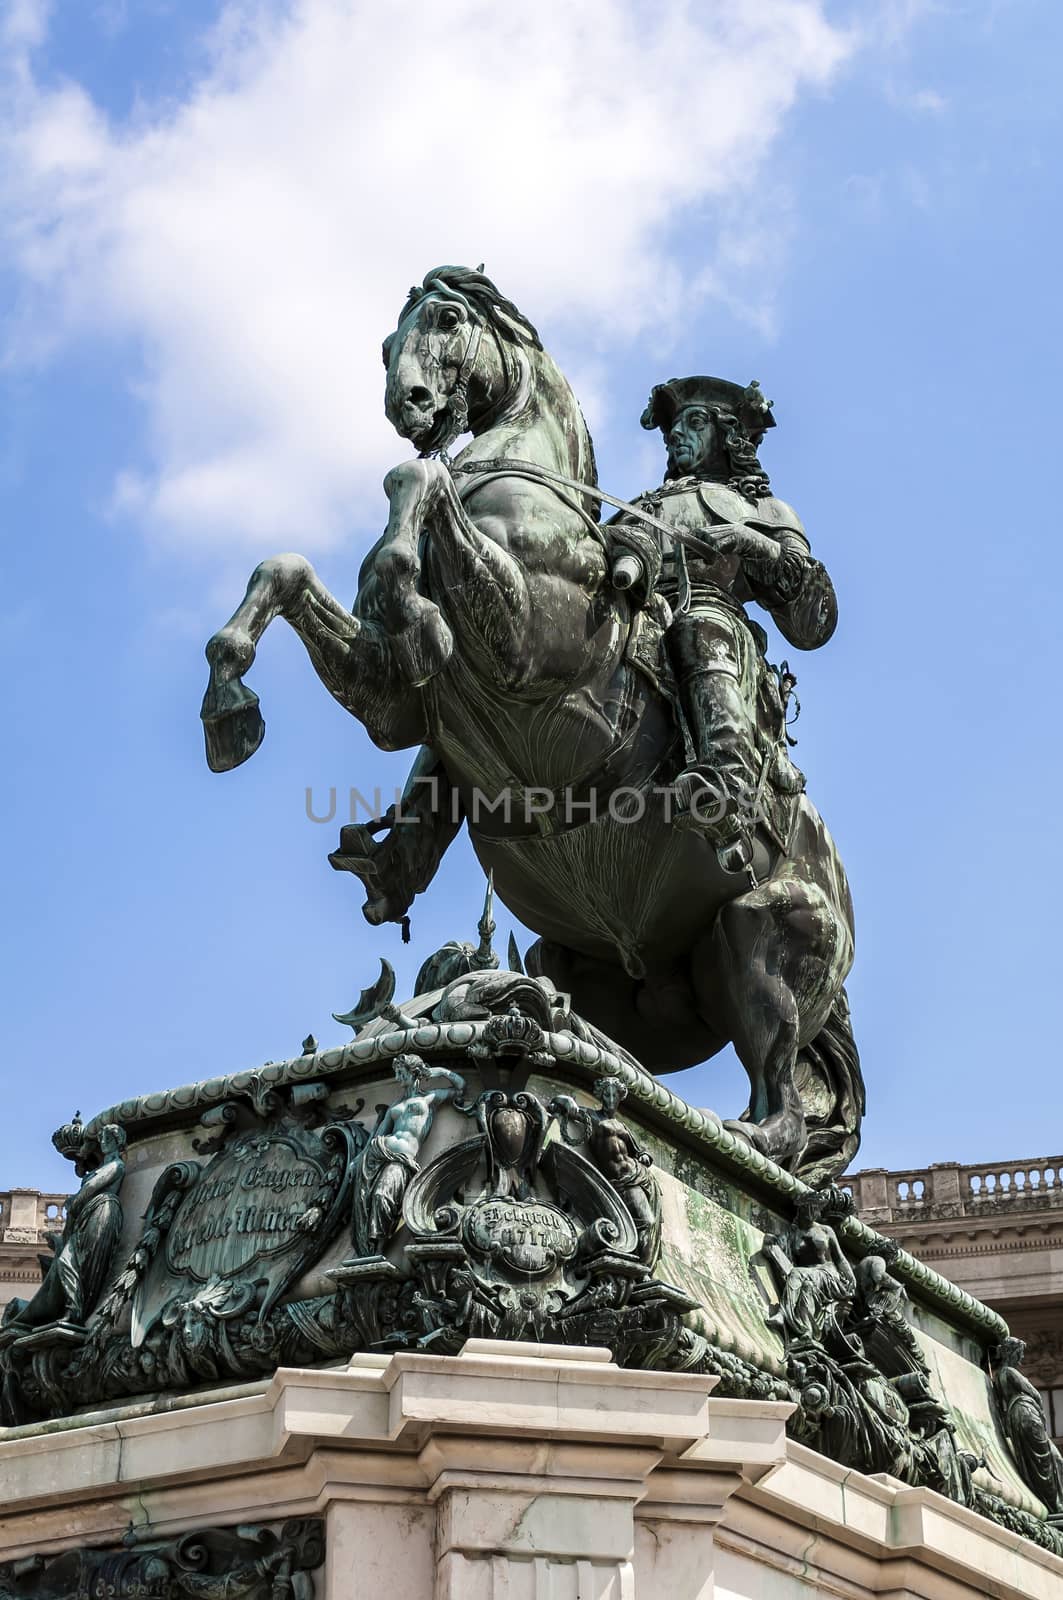 Prince Eugene of Savoy. by FER737NG